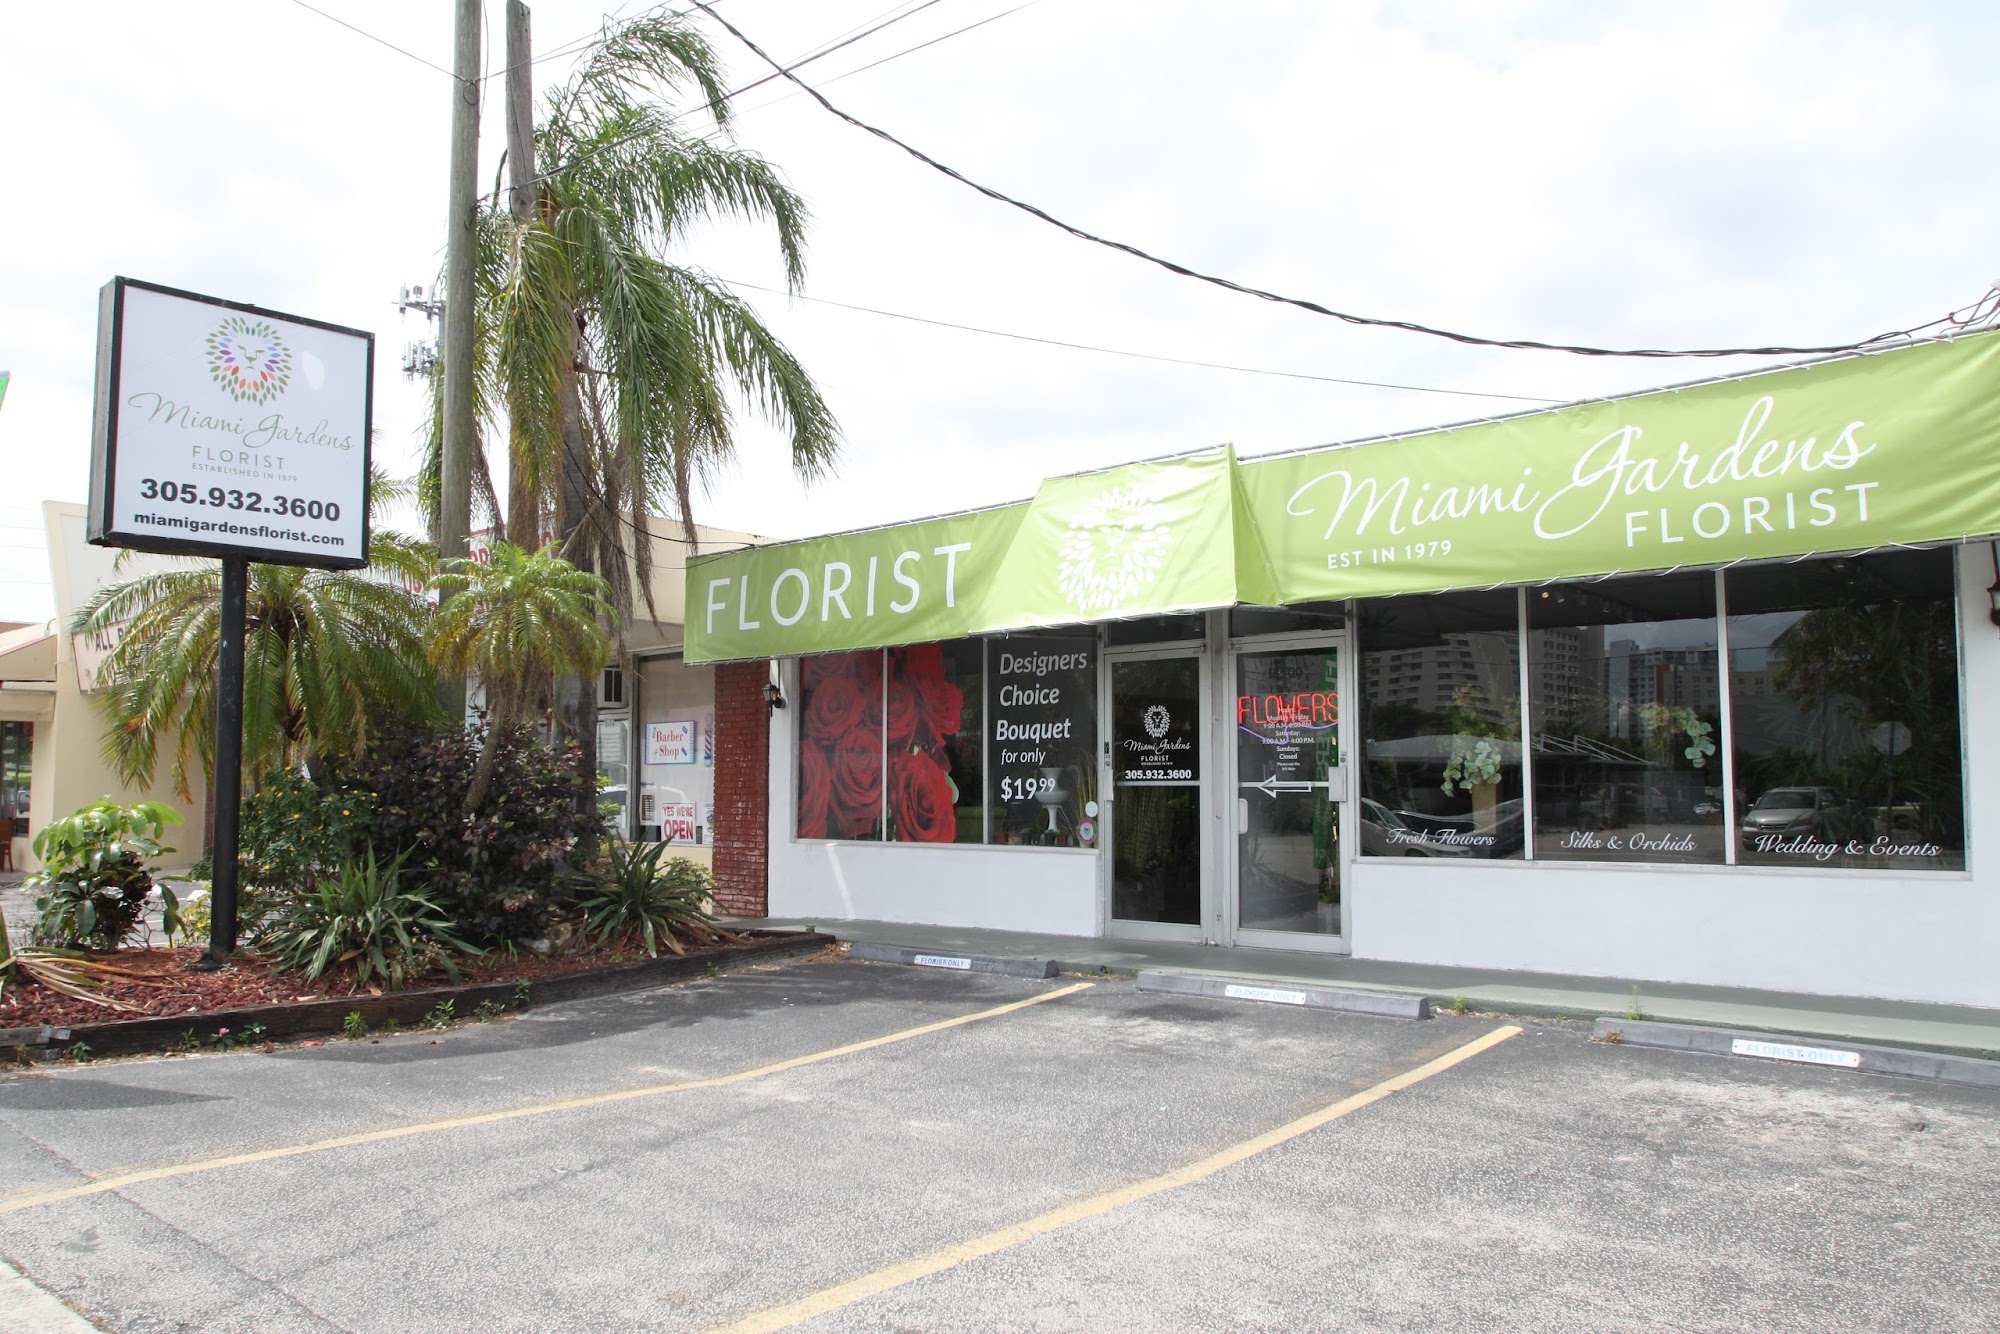 Miami Gardens Florist of Aventura by South Florals